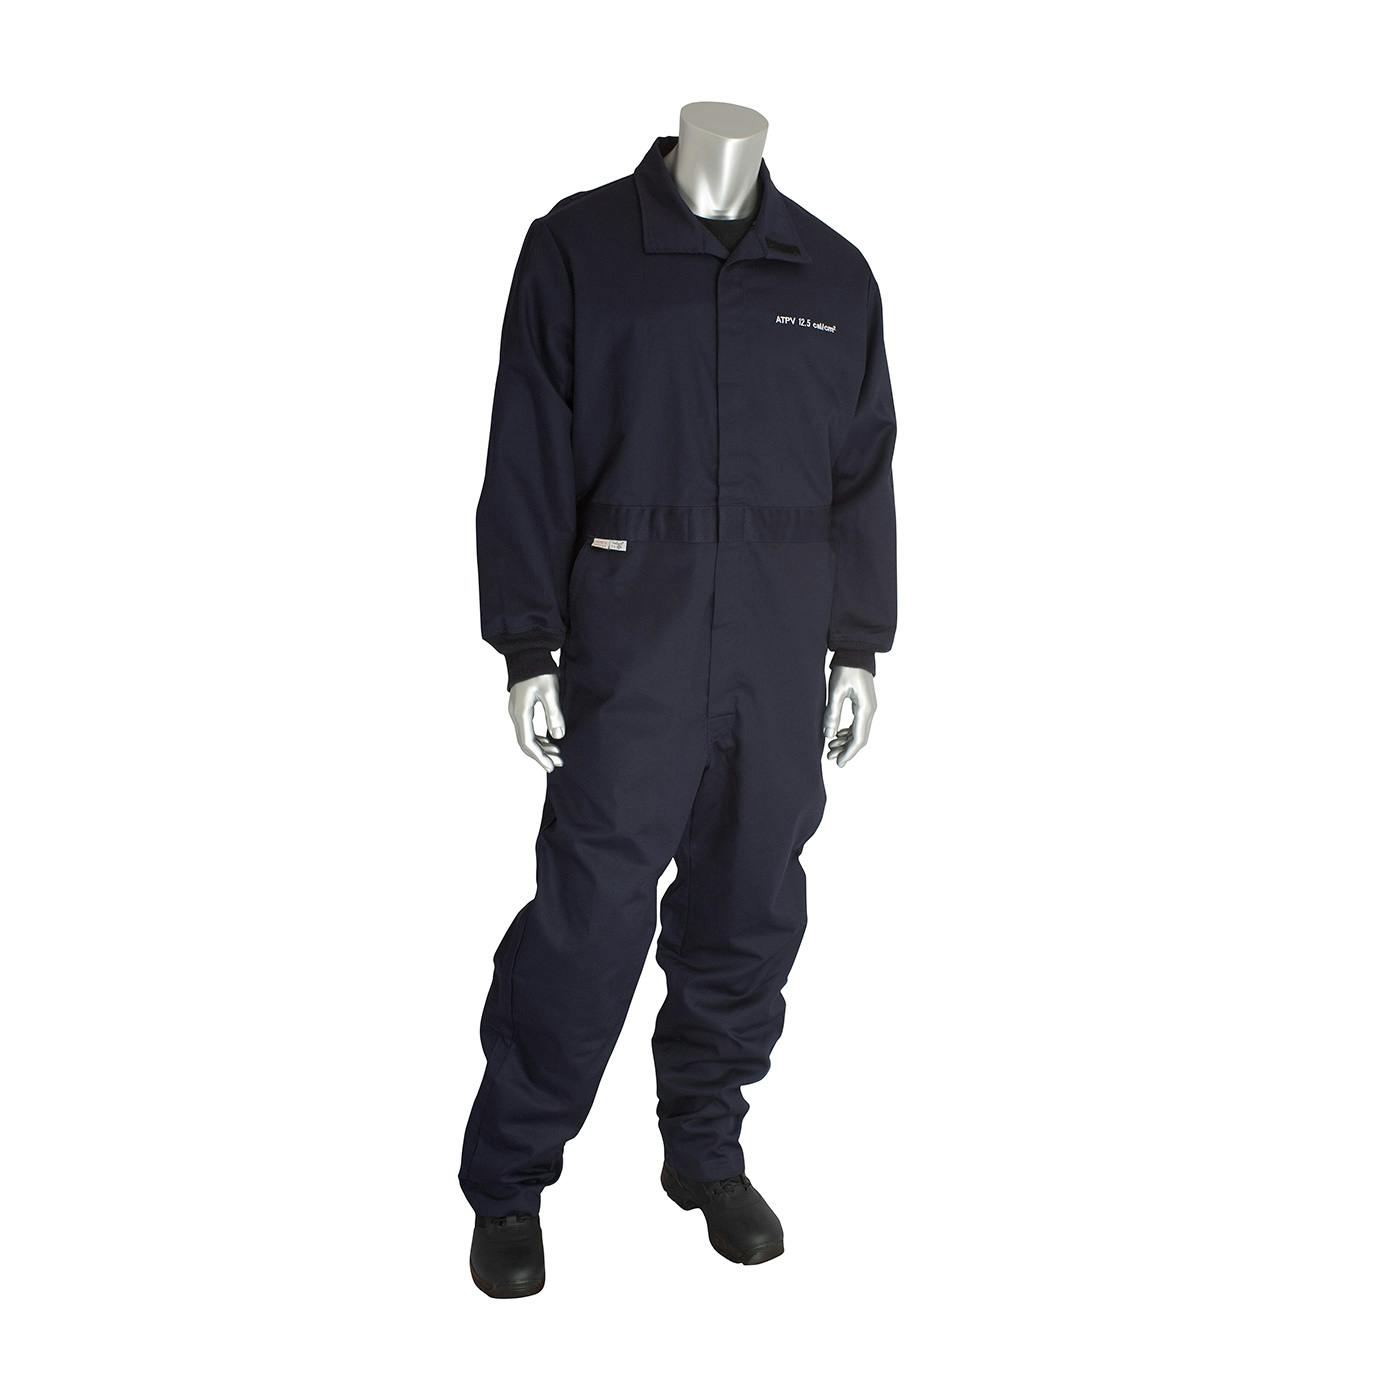 AR/FR Dual Certified Coverall - 12 Cal/cm2, Navy (9100-2170D)